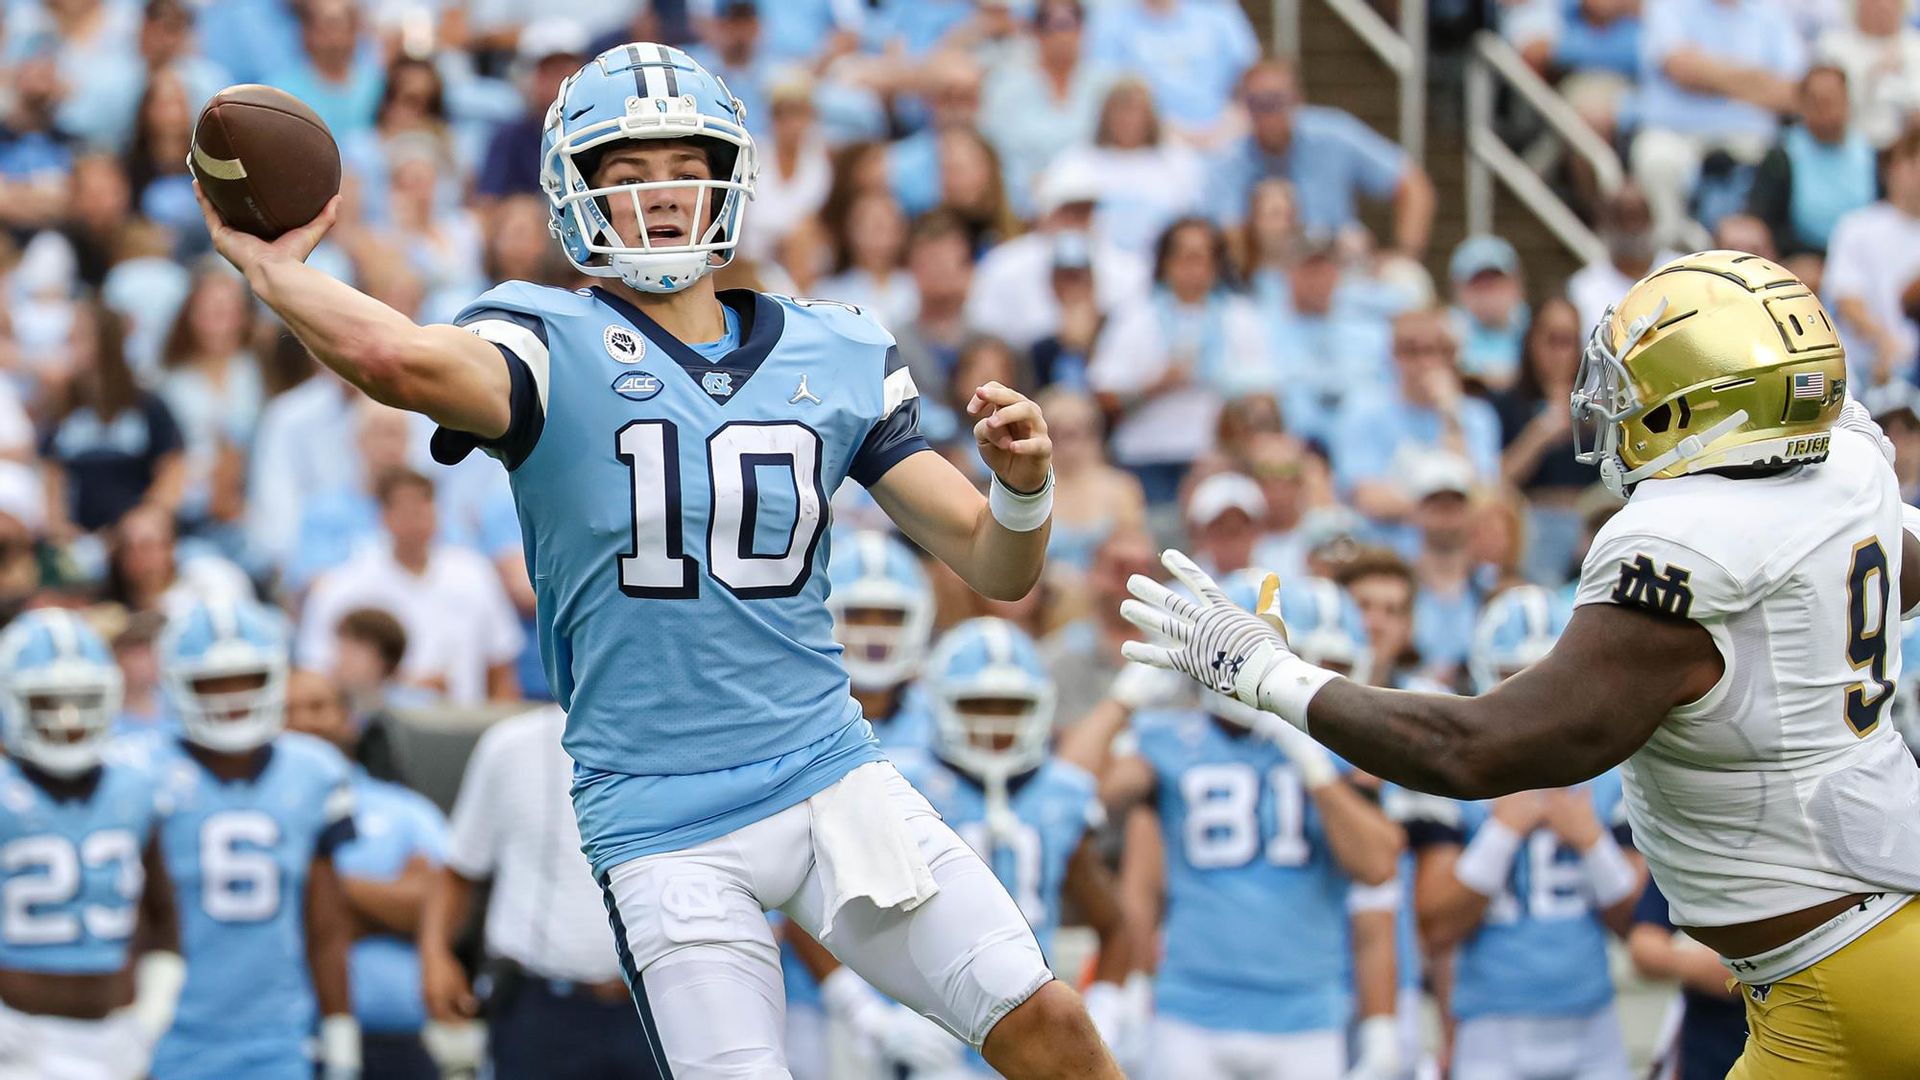 UNC football releases uniform combination for Wake game